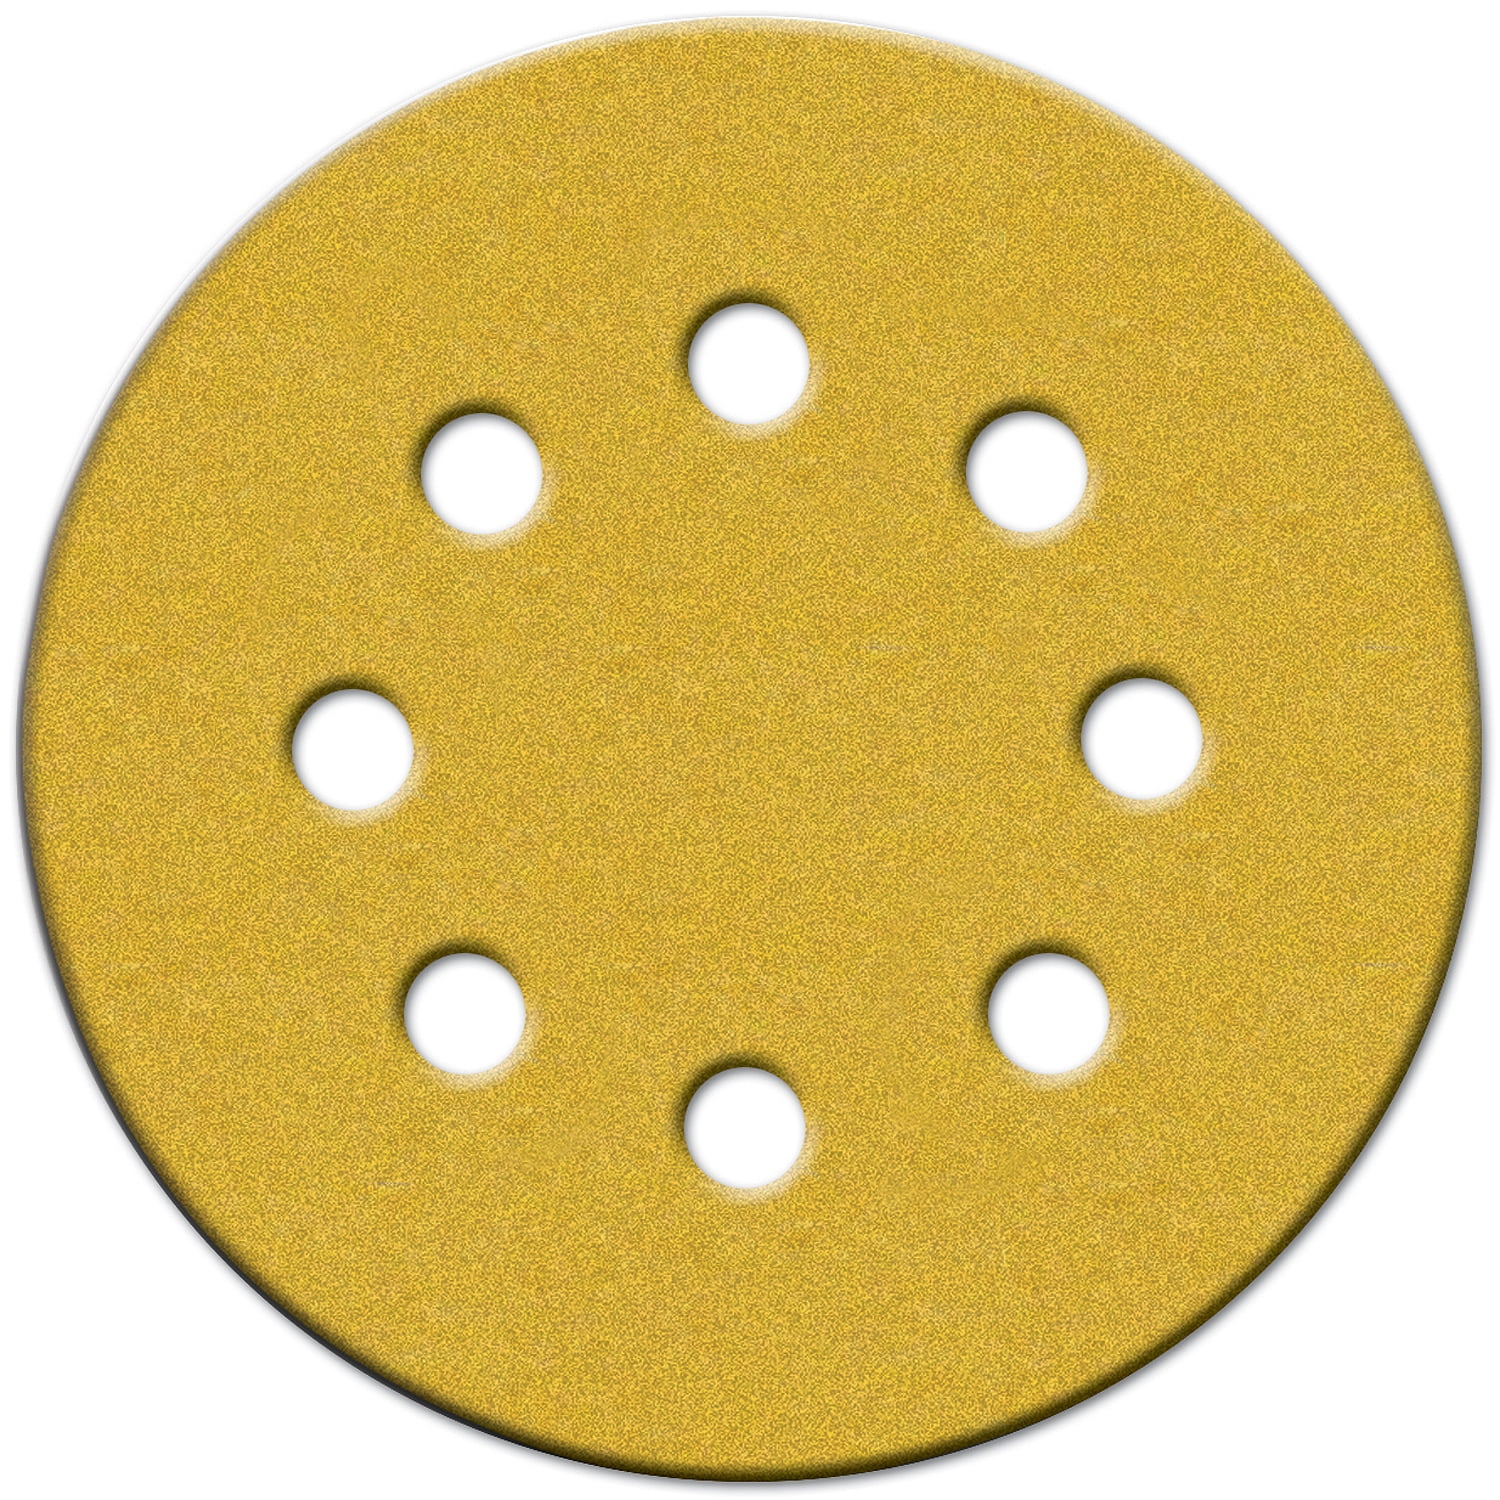 Box Of 100 NORTON Yellow 80 Grit No Hole Hook-and-Loop 6" Sanding Discs NEW 